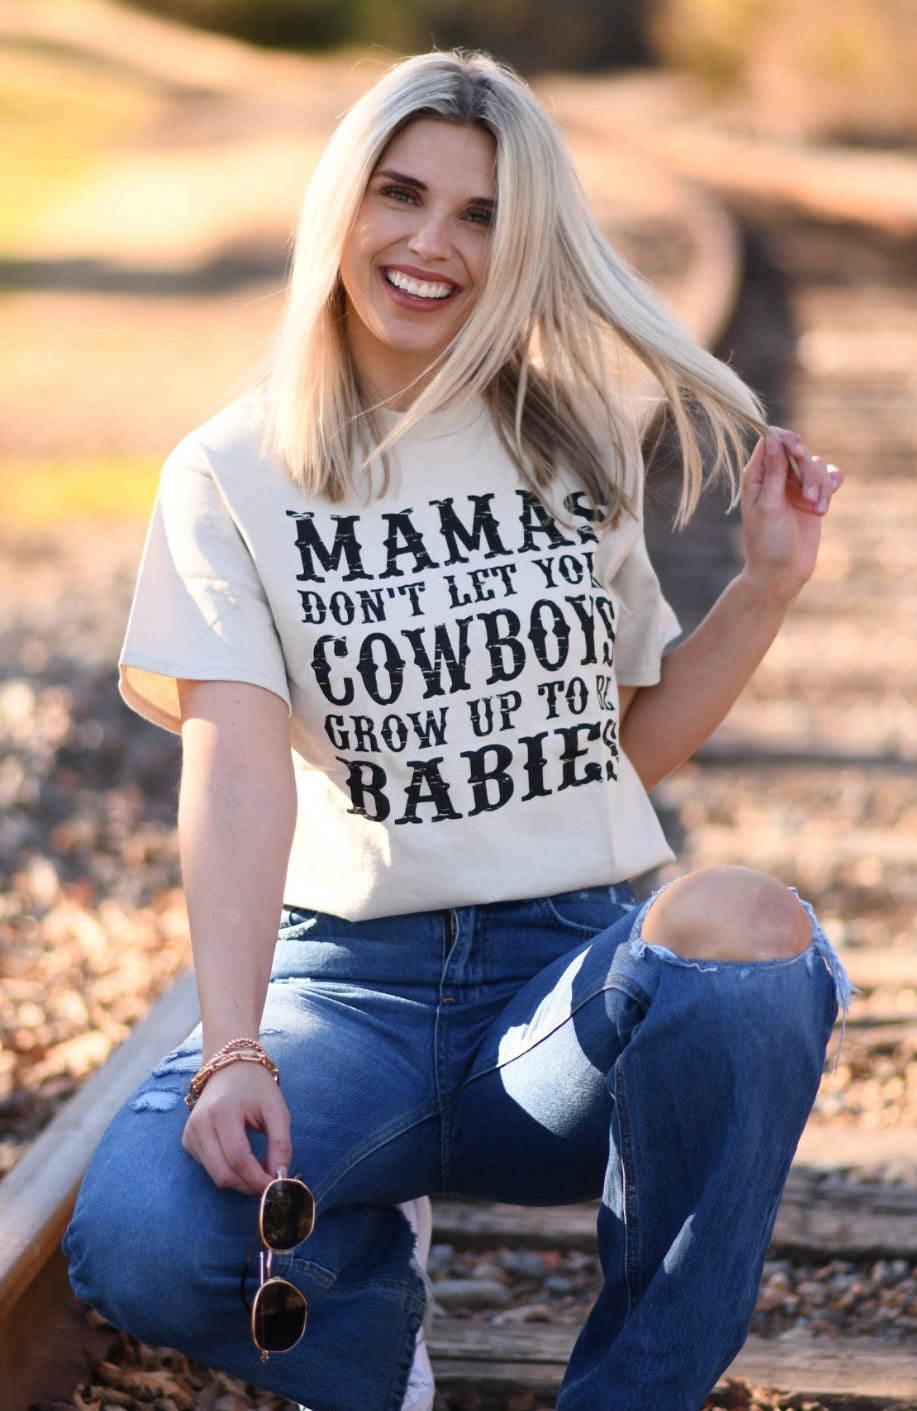 Mamas Don’t Let Your Cowboys Grow Up To Be Babies Tee